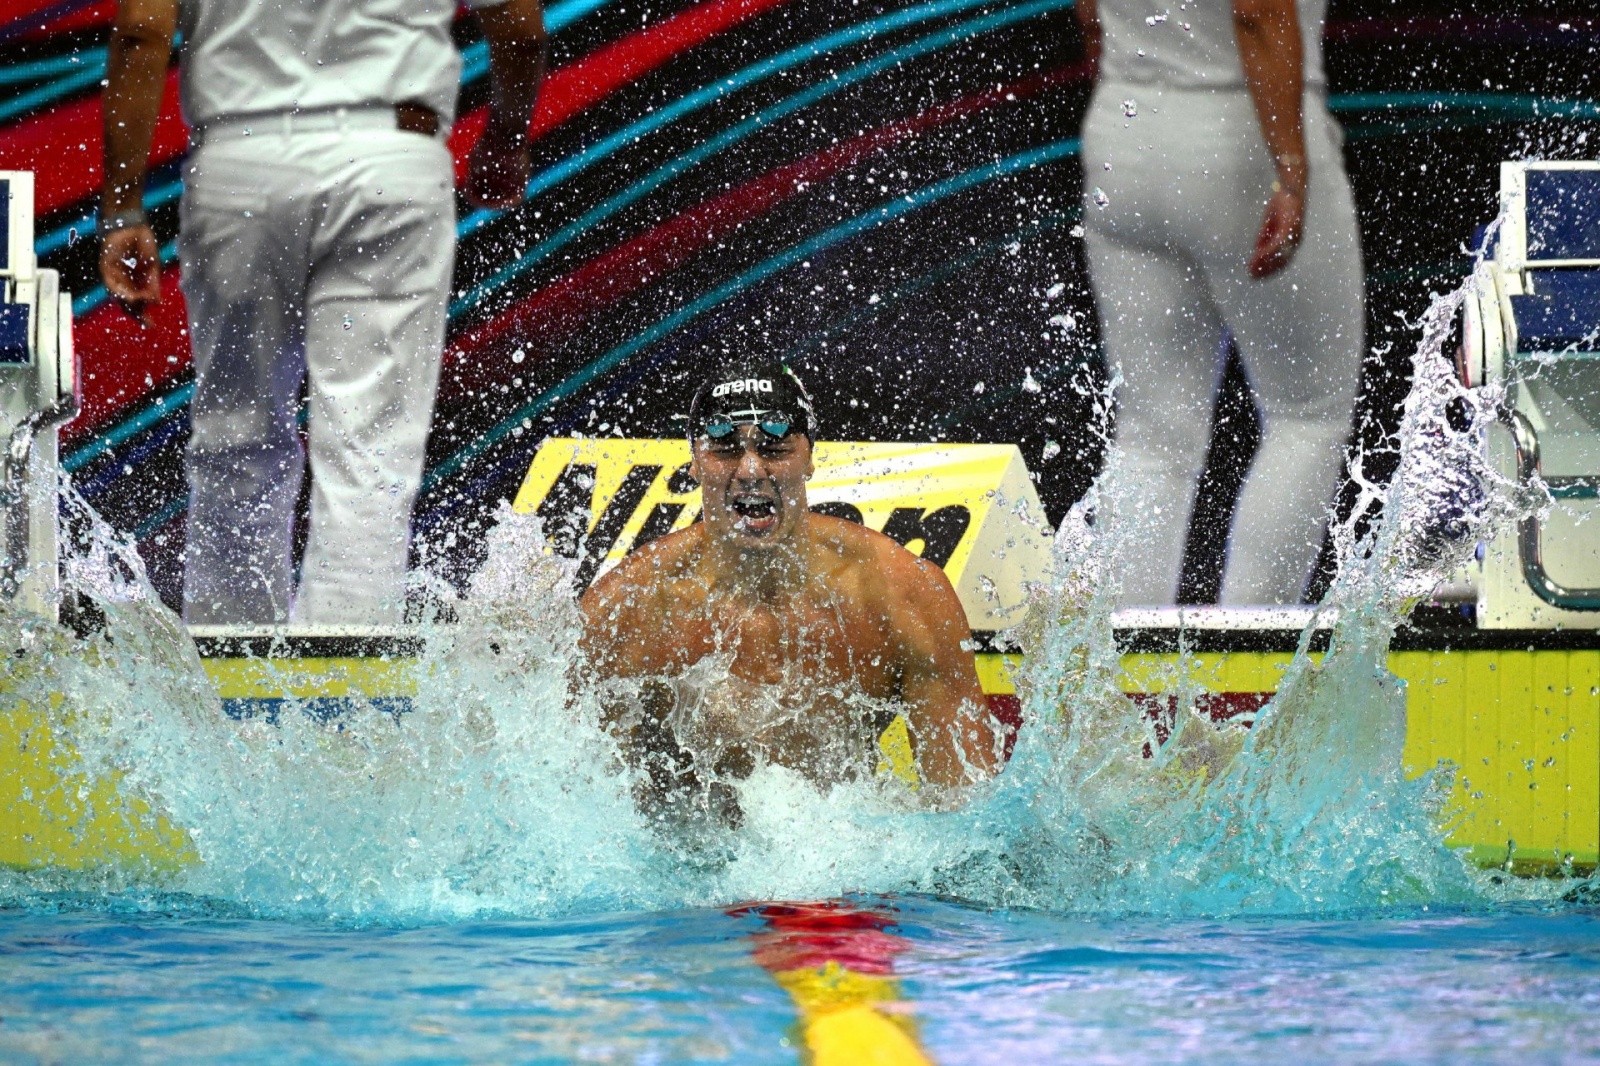 epa10022447 Nicolo Martinenghi of Italy celebrates after winning the men's 100m Breaststroke final of the Swimming events at the 19th FINA World Aquatics Championships in Budapest, Hungary, 19 June 2022. EPA/Tibor Illyes HUNGARY OUT